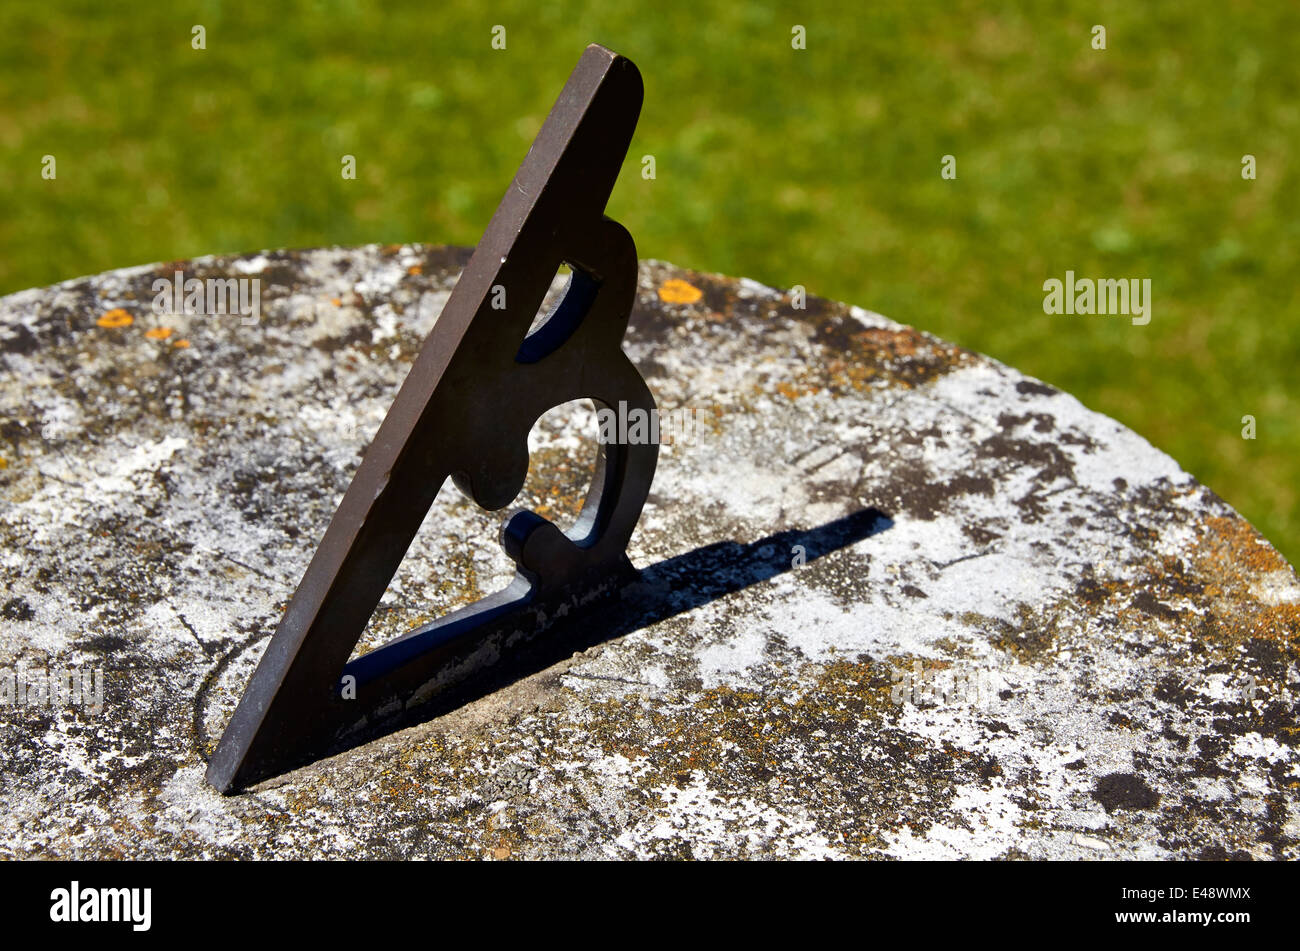 A small sun dial (or sundial) showing a solar time of 12:30 hrs. Stock Photo